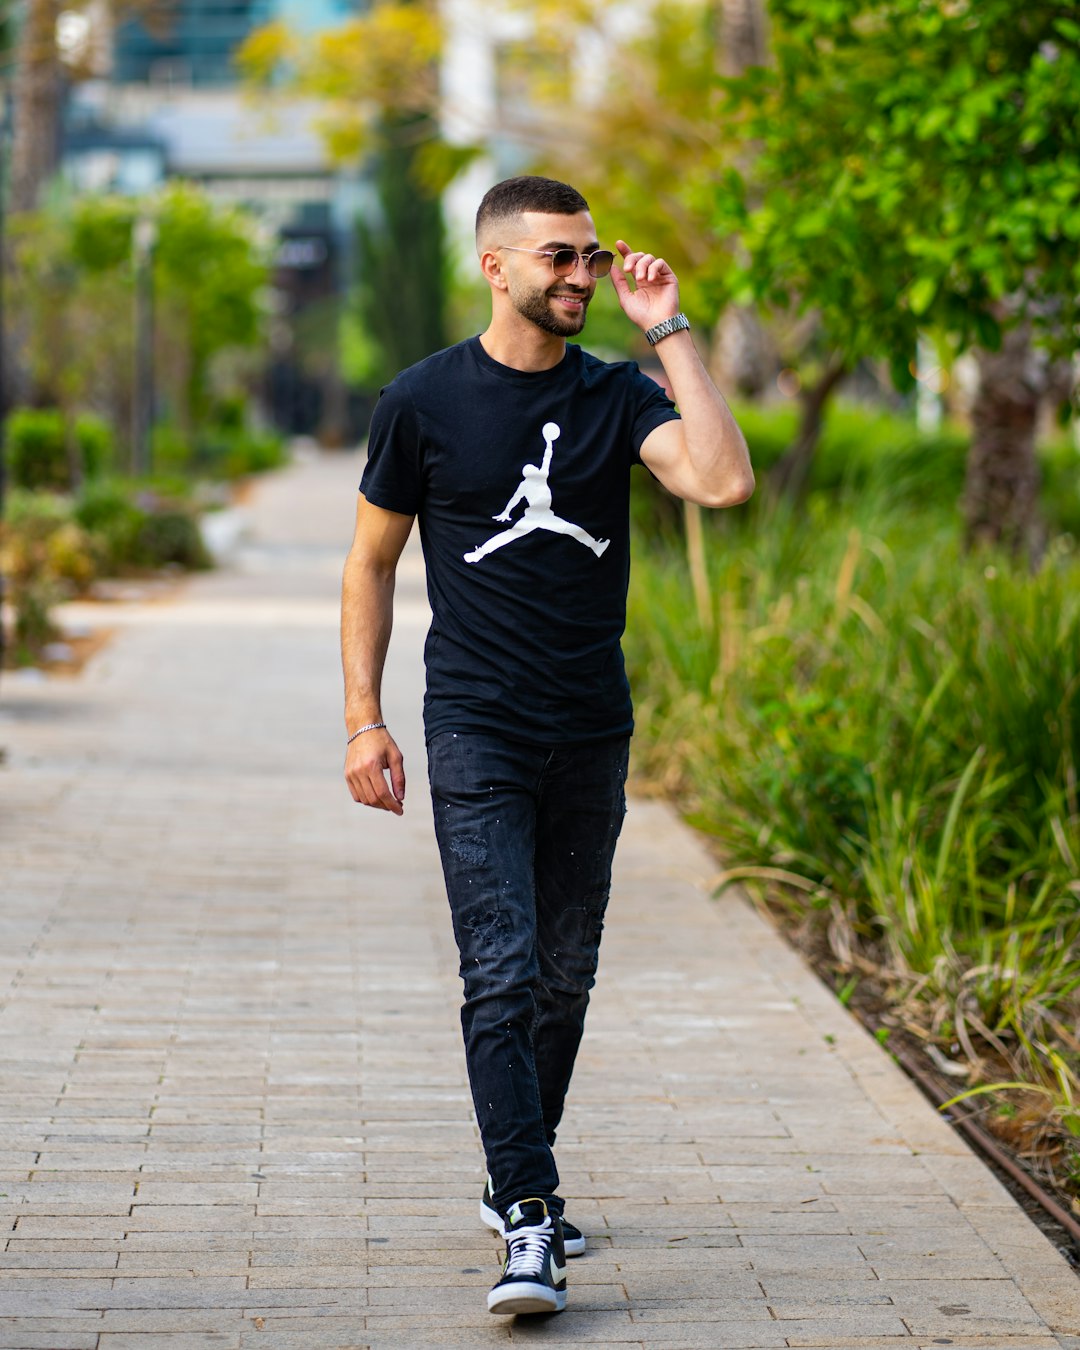 man in black crew neck t-shirt and black pants standing on sidewalk during daytime